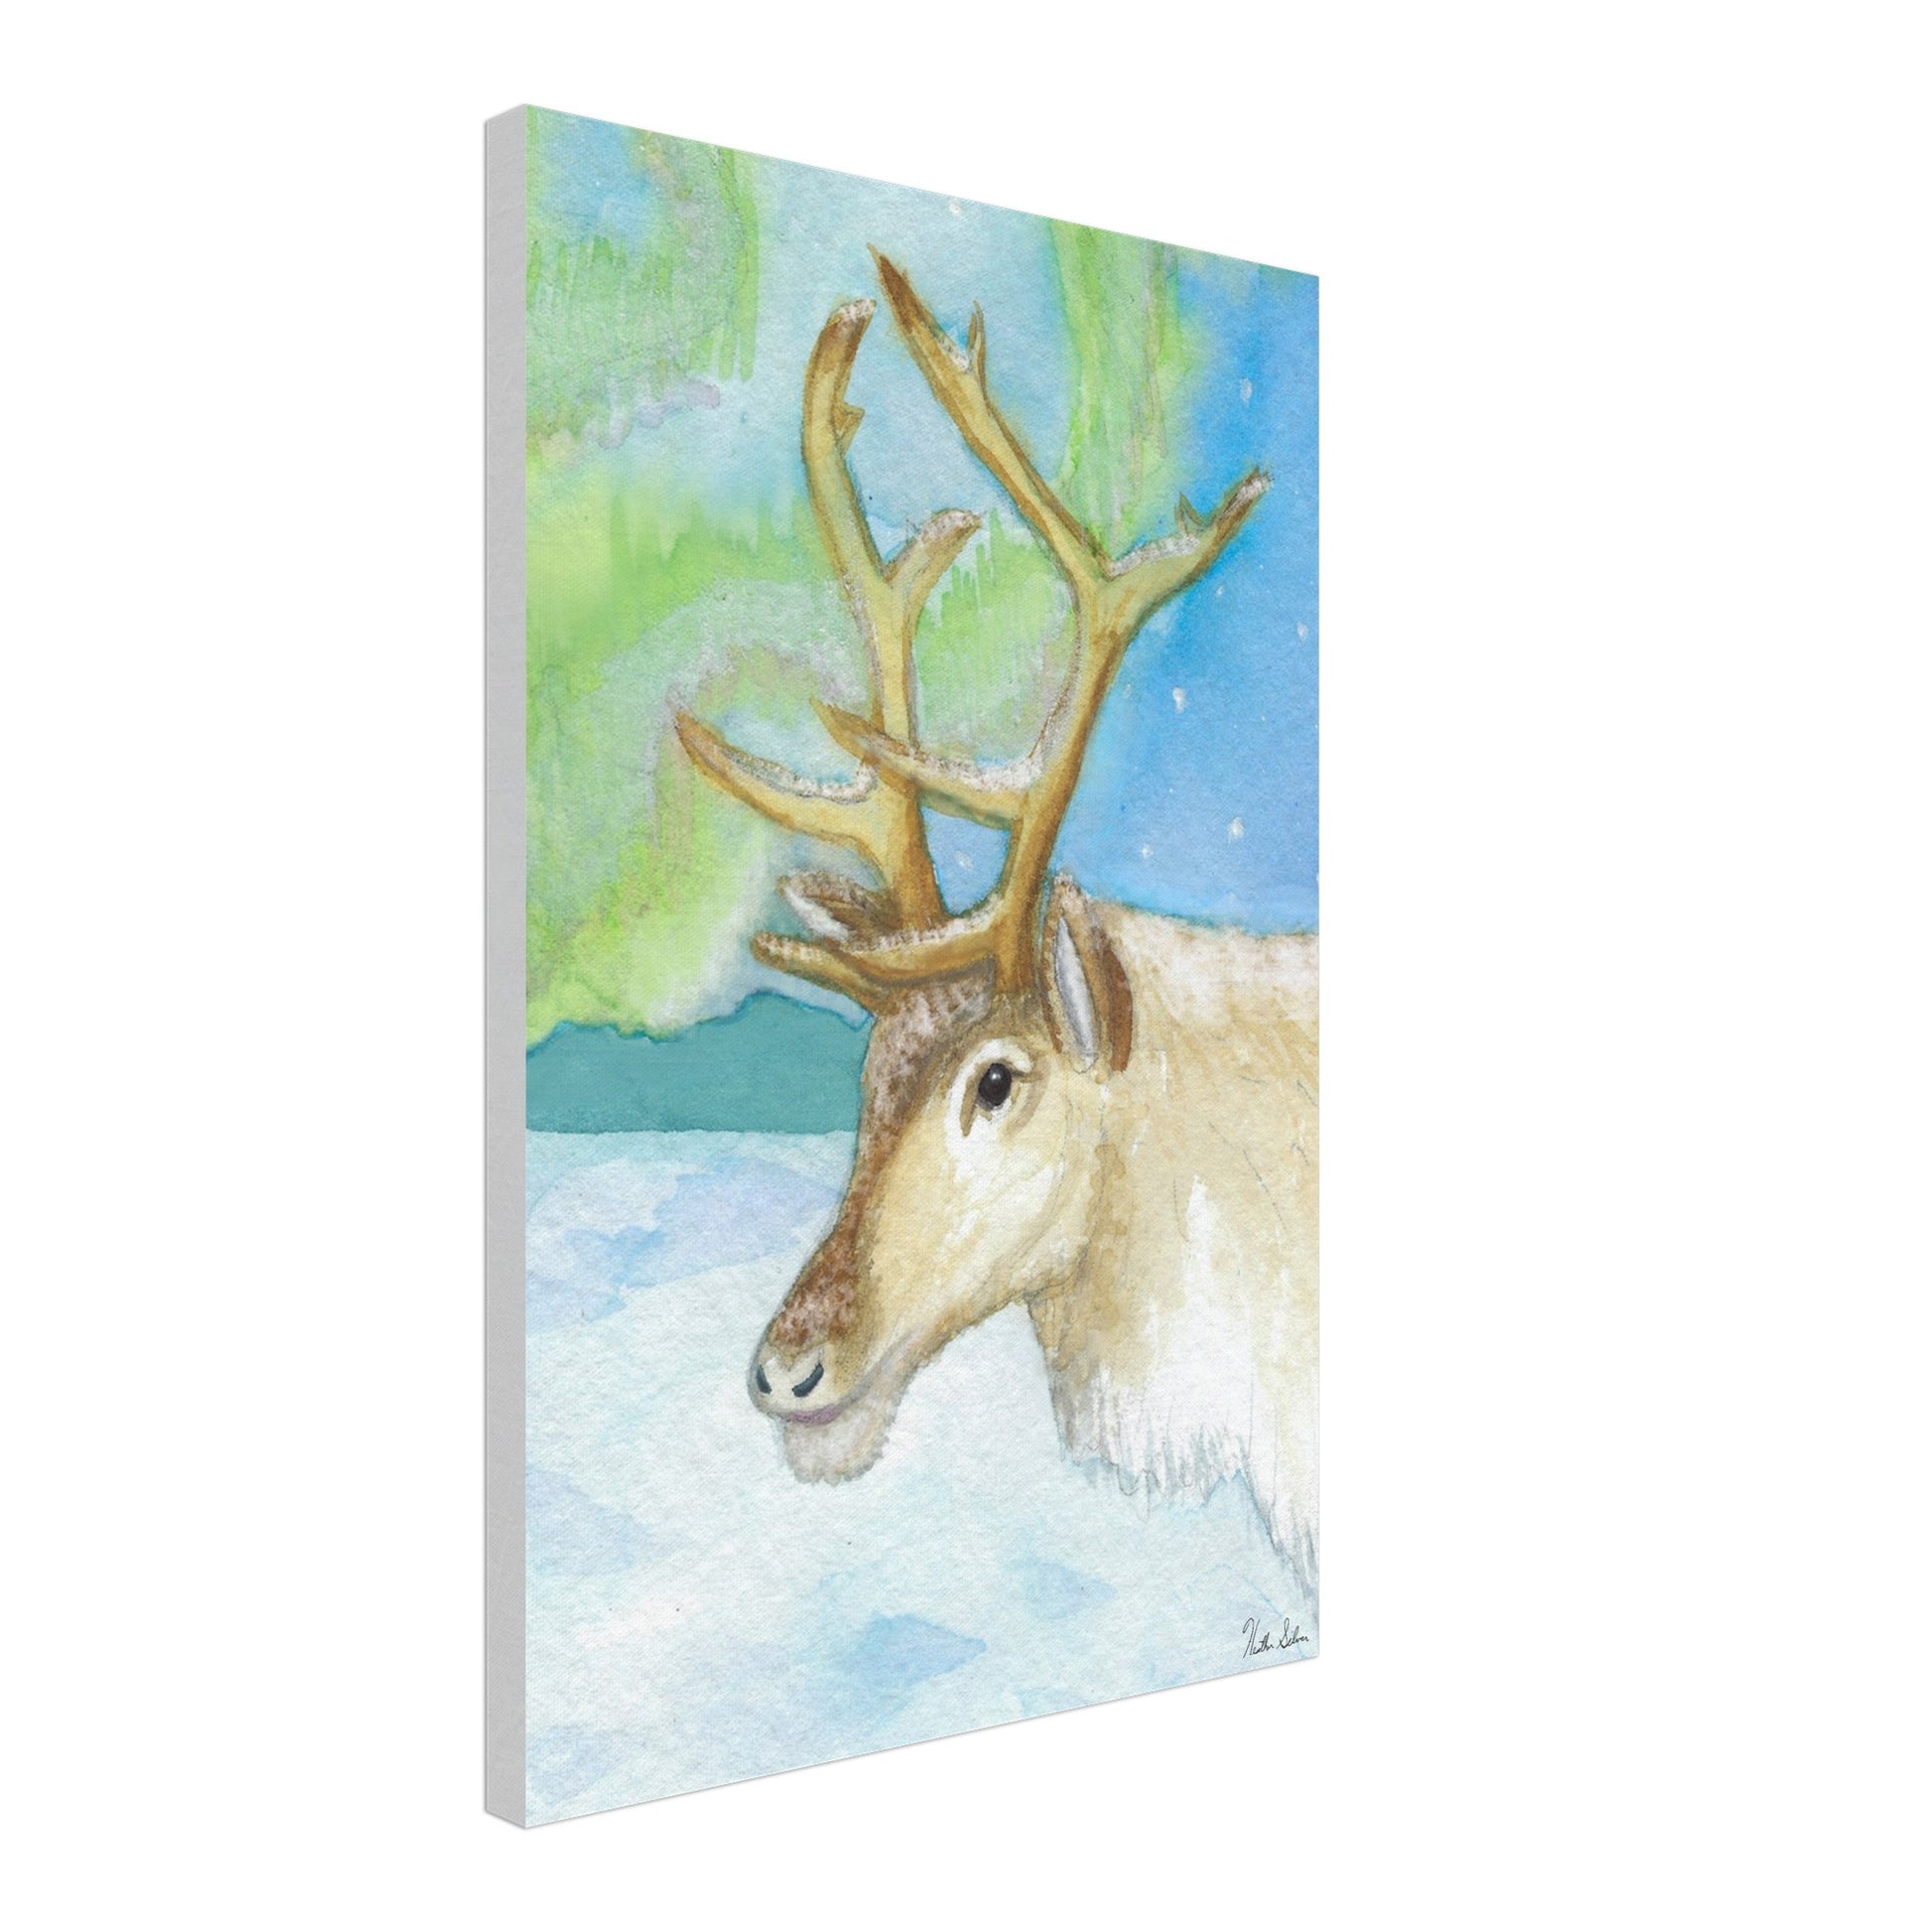 16 by 24 inch slim canvas print of Heather Silver's watercolor painting, northern lights reindeer. Canvas shown at an angle.